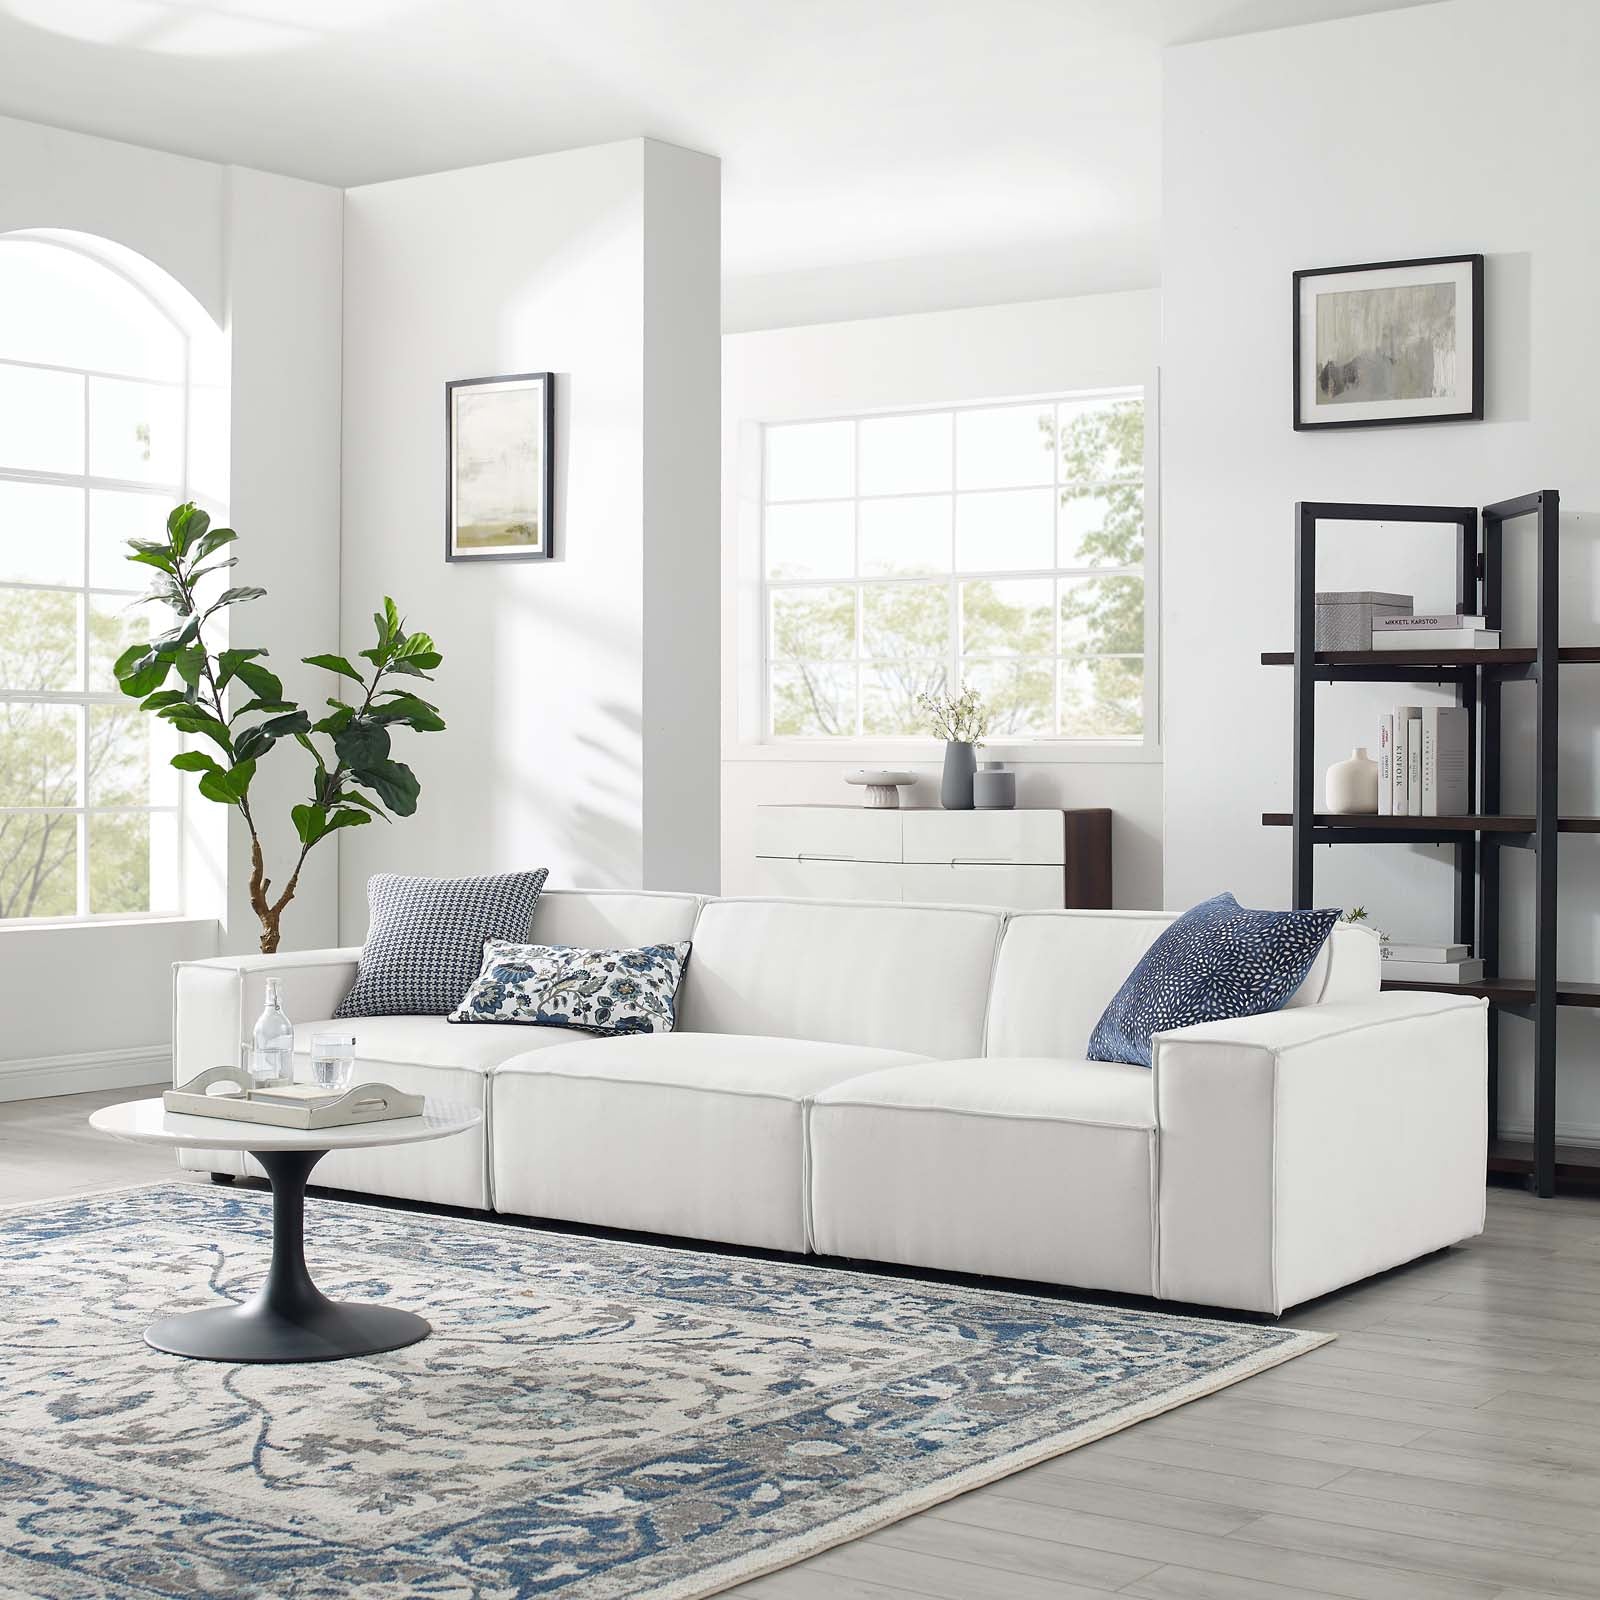 Re 3 Piece Sectional Sofa White